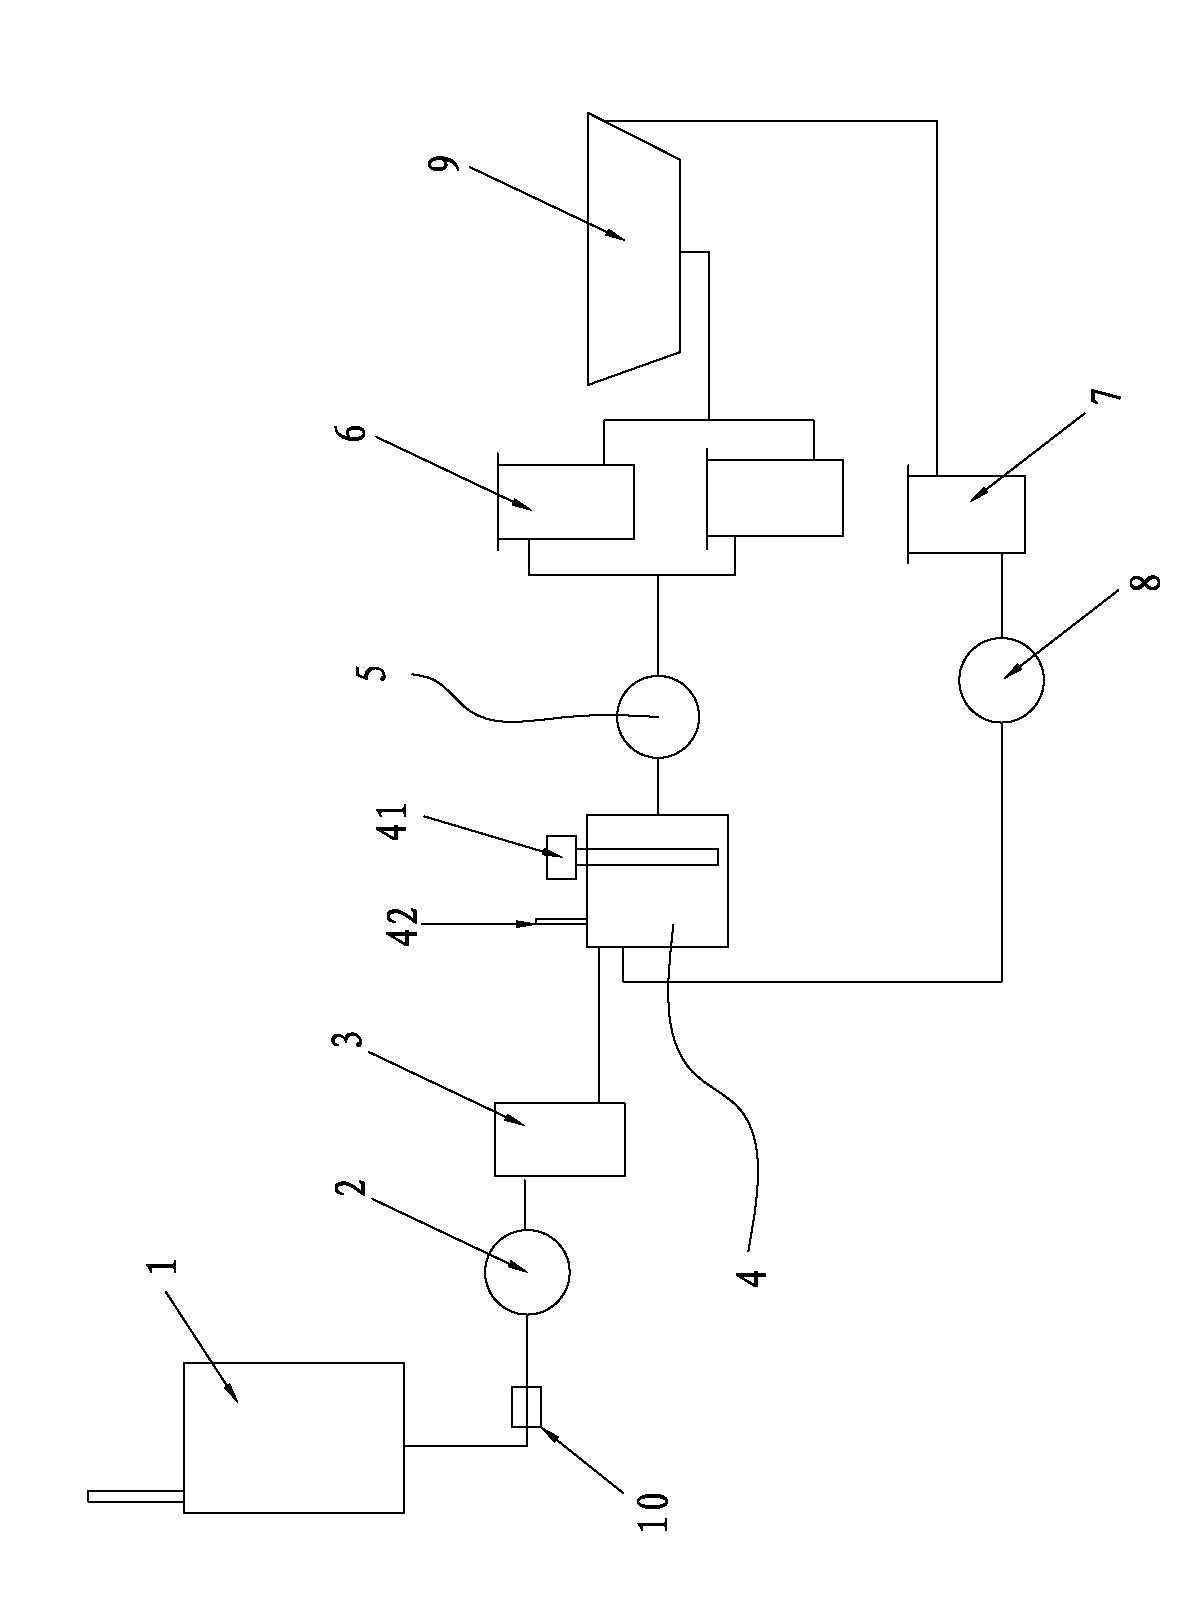 Glue solution filtering device